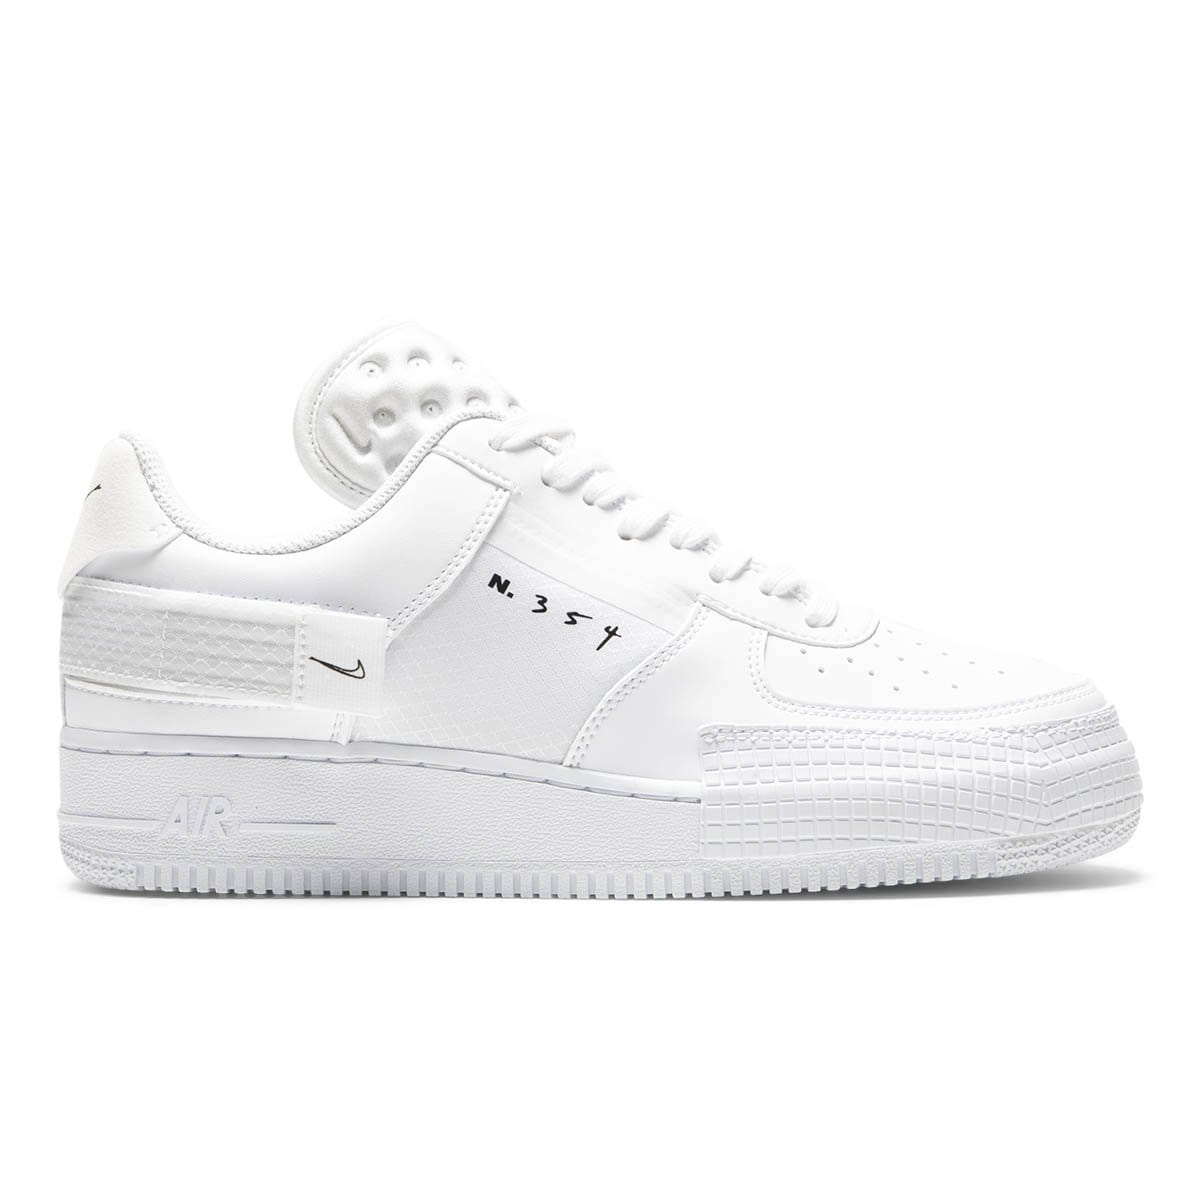 Nike Shoes AIR FORCE 1 TYPE-2